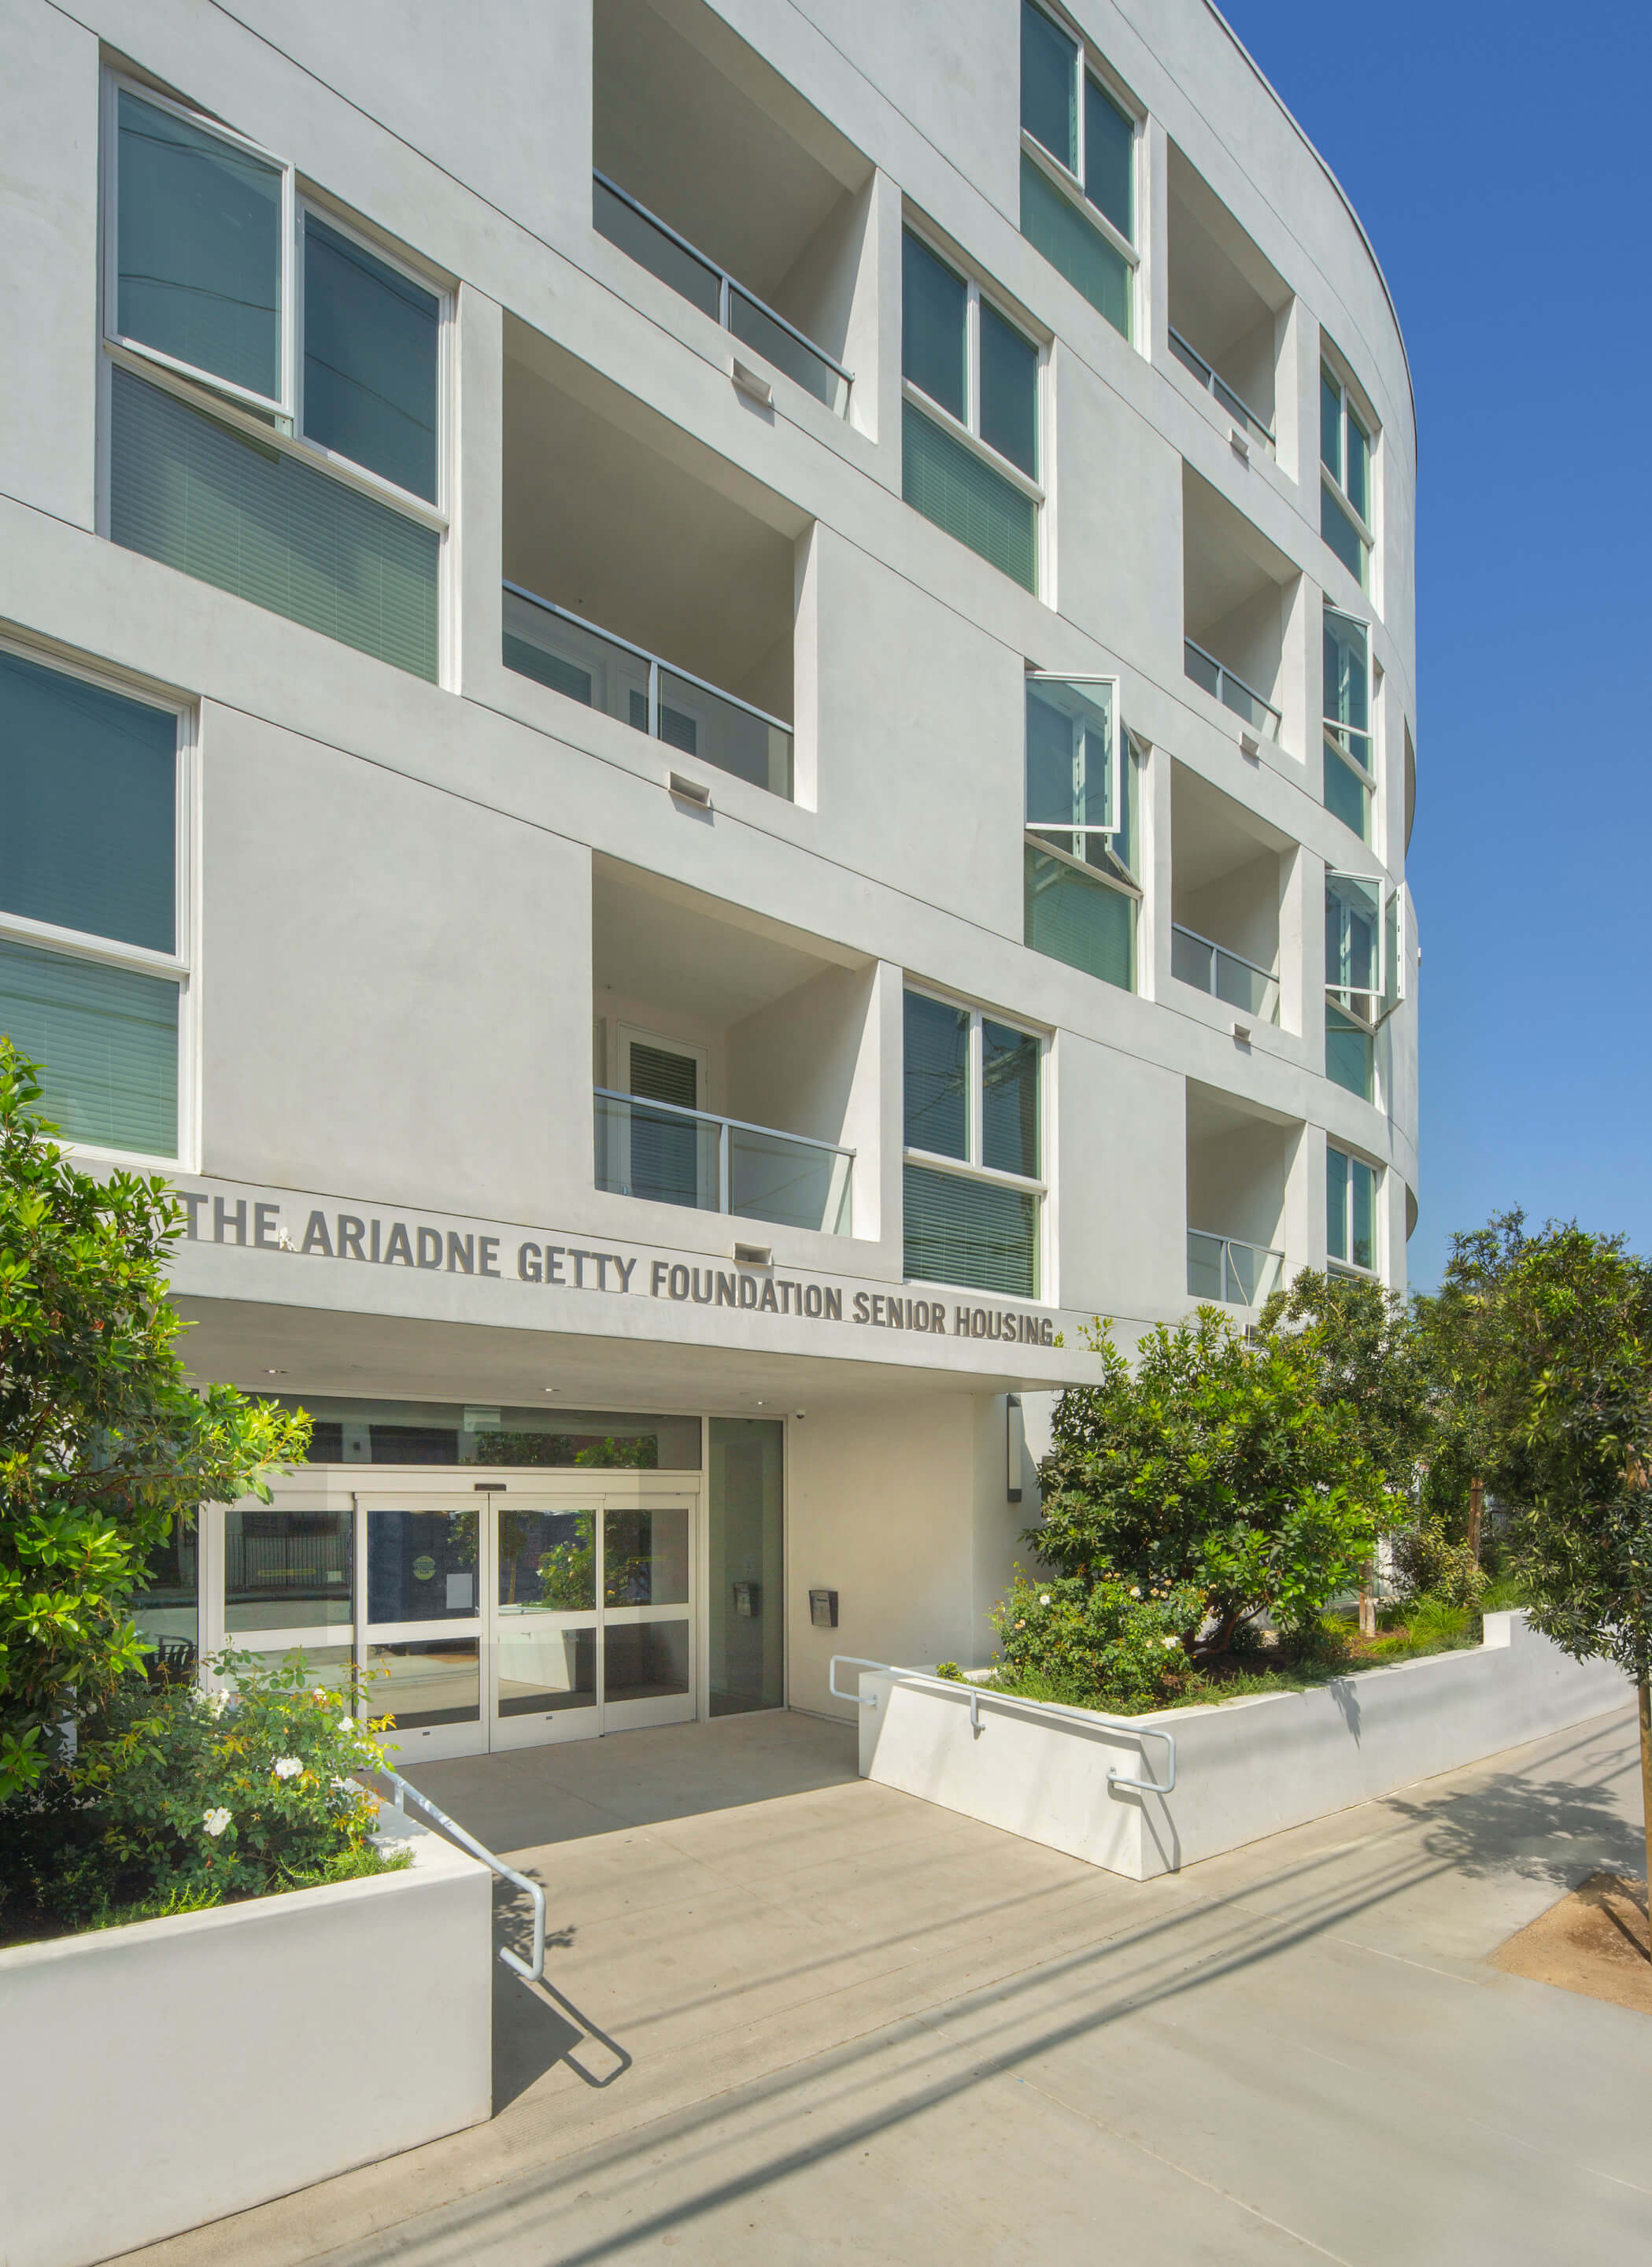 entrance to a white-stucco housing complex with a Ariadne Getty Foundation Senior Housing sign